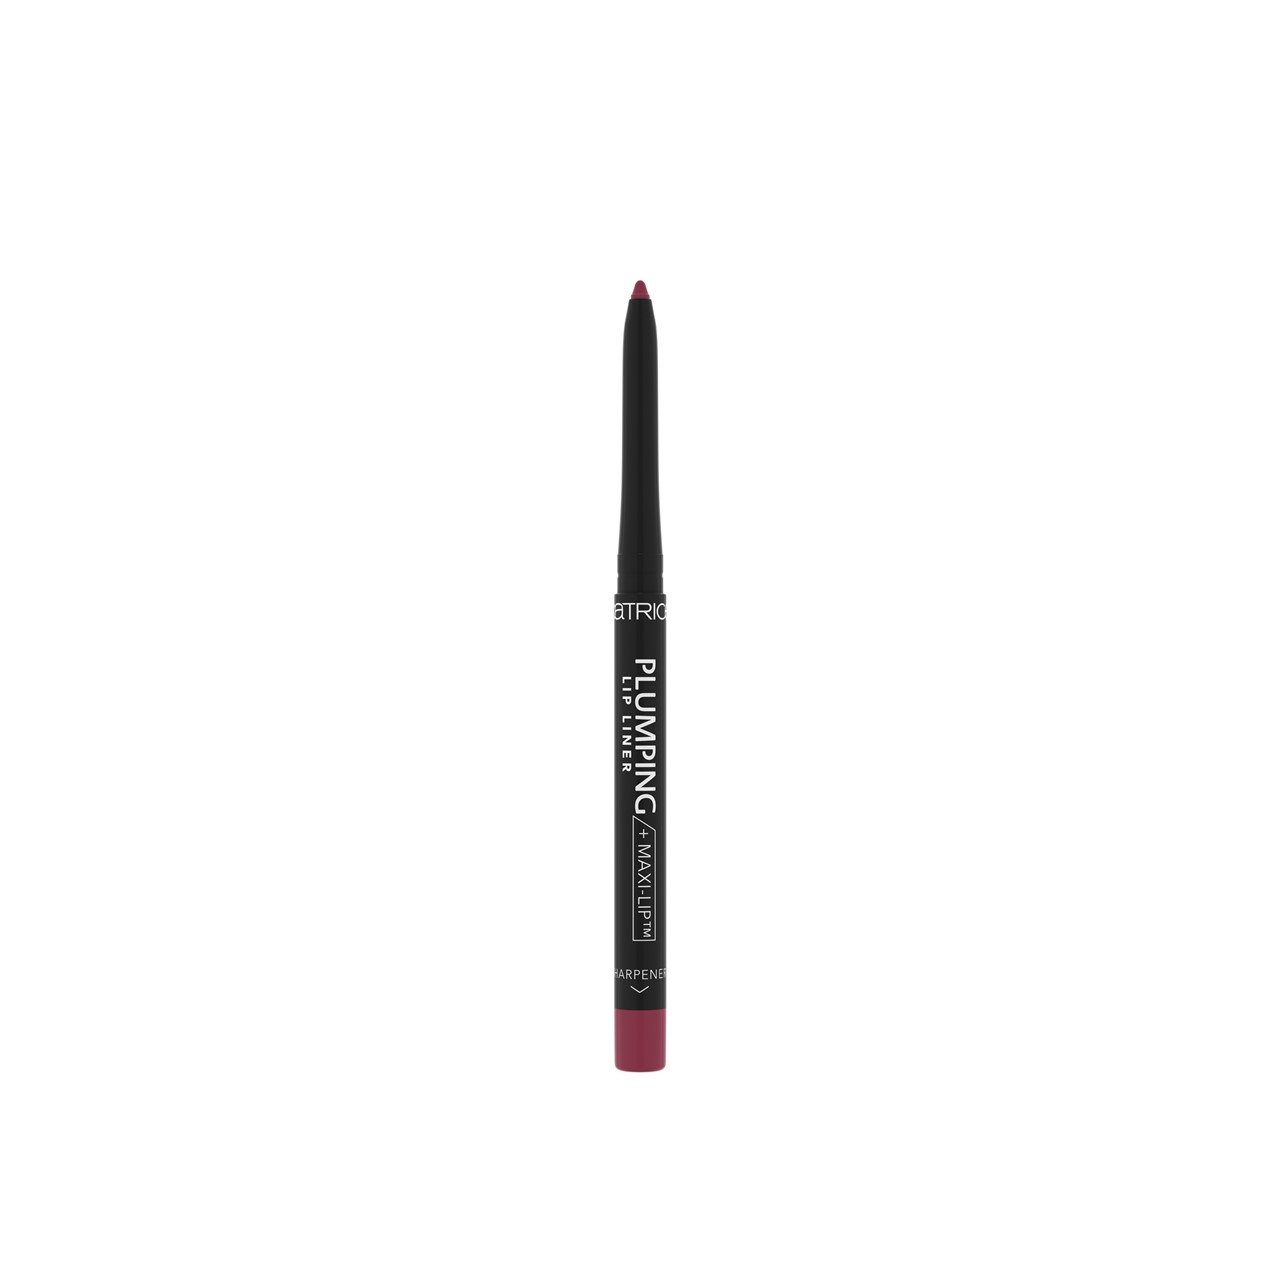 Catrice Plumping Lip Liner 090 The Wild One 0.35g